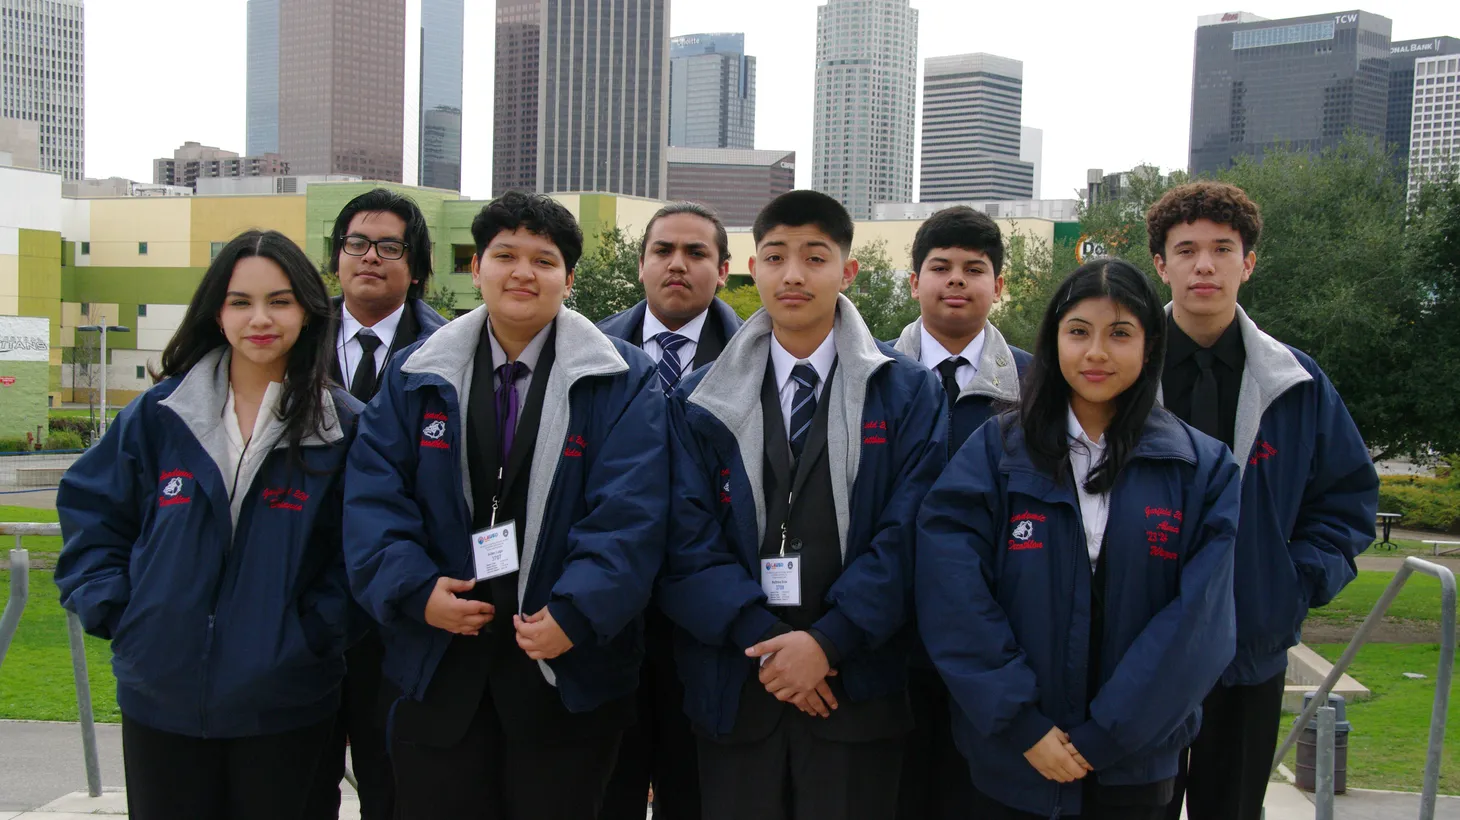 The Garfield High academic decathlon team placed sixth among LA Unified schools at the city competition in February.